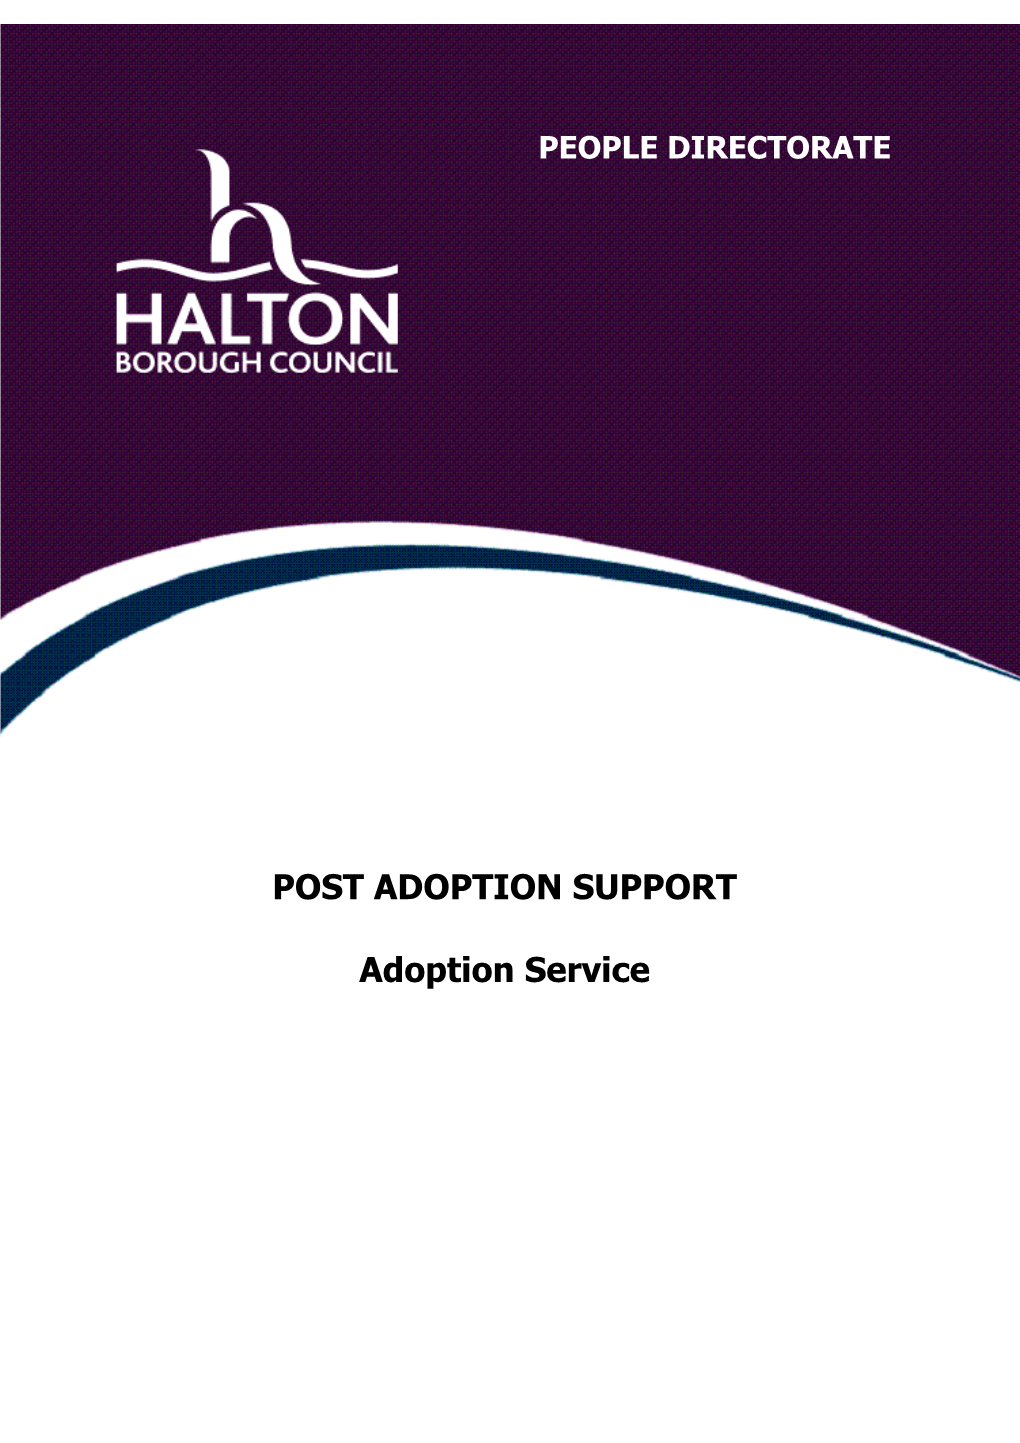 2.0Assessment for Adoption Support Services